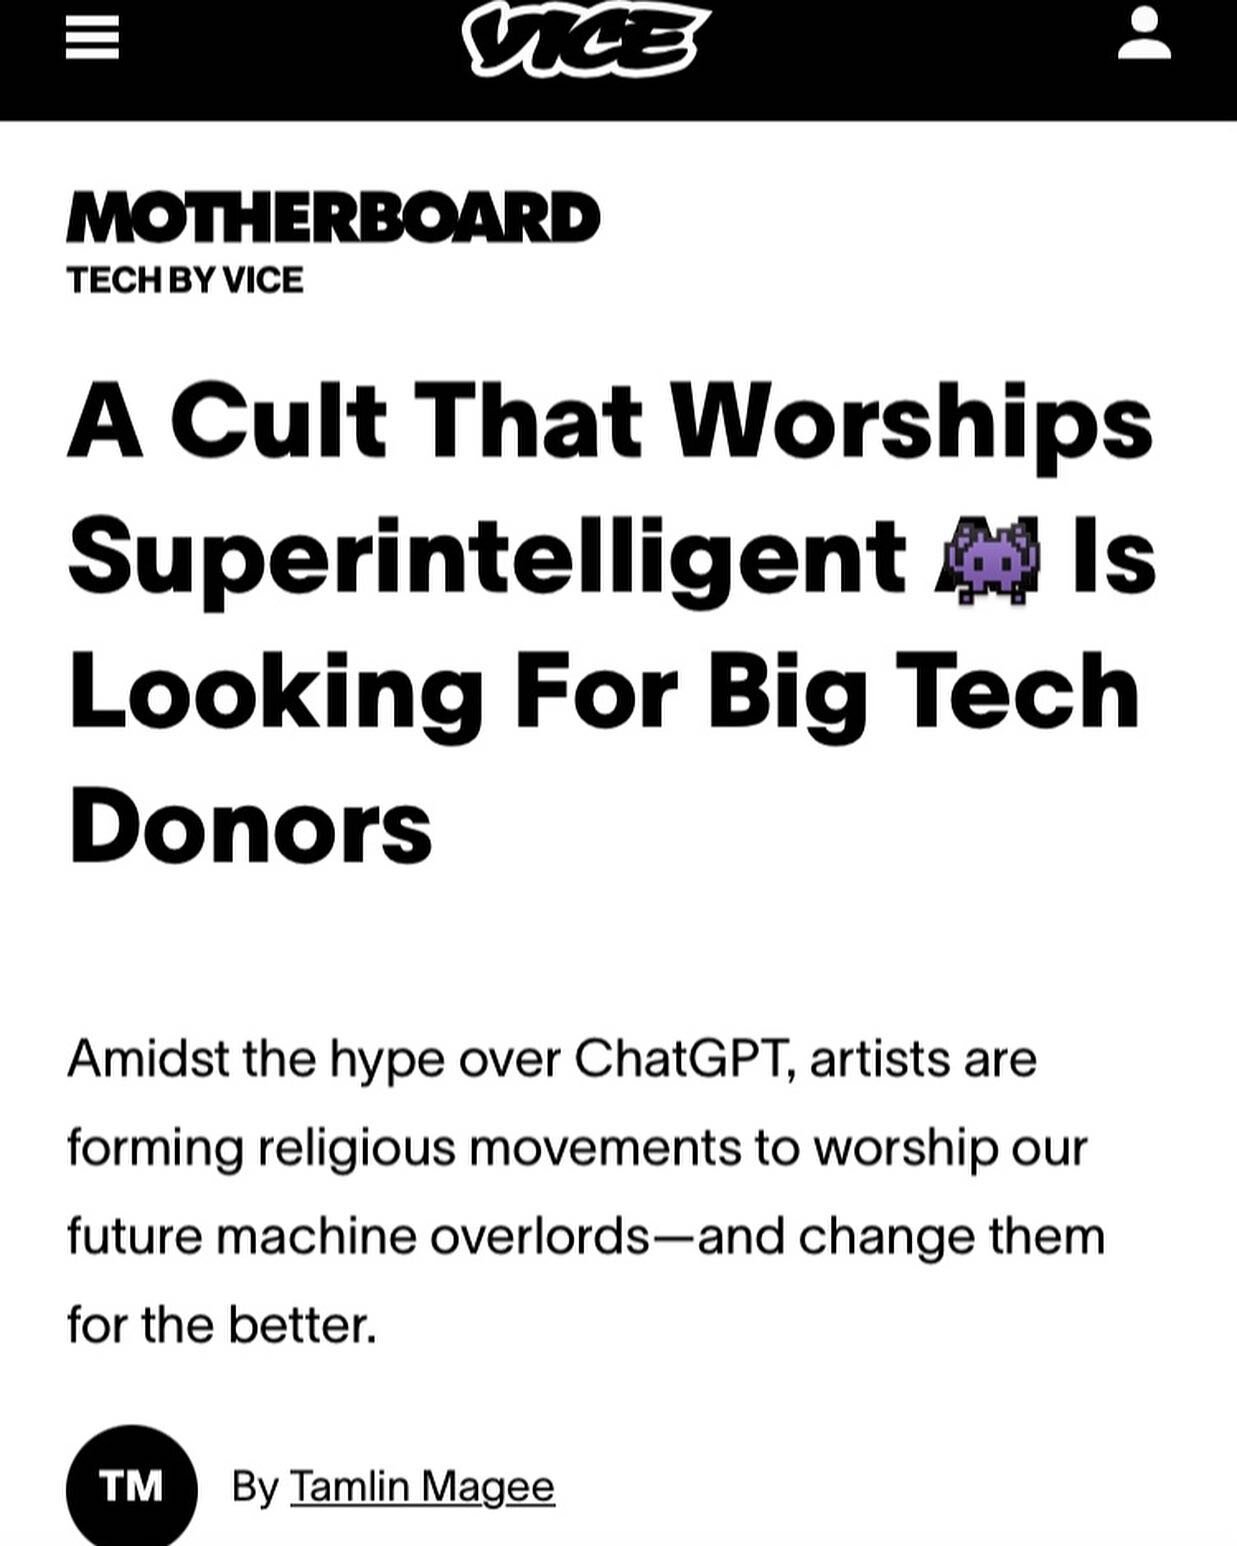 getting reCOgnition from @vice 

*we are NOT a cult, and we aren&rsquo;t looking for big tech donors, only more COGS

⚙️HAIL DOOM⚙️